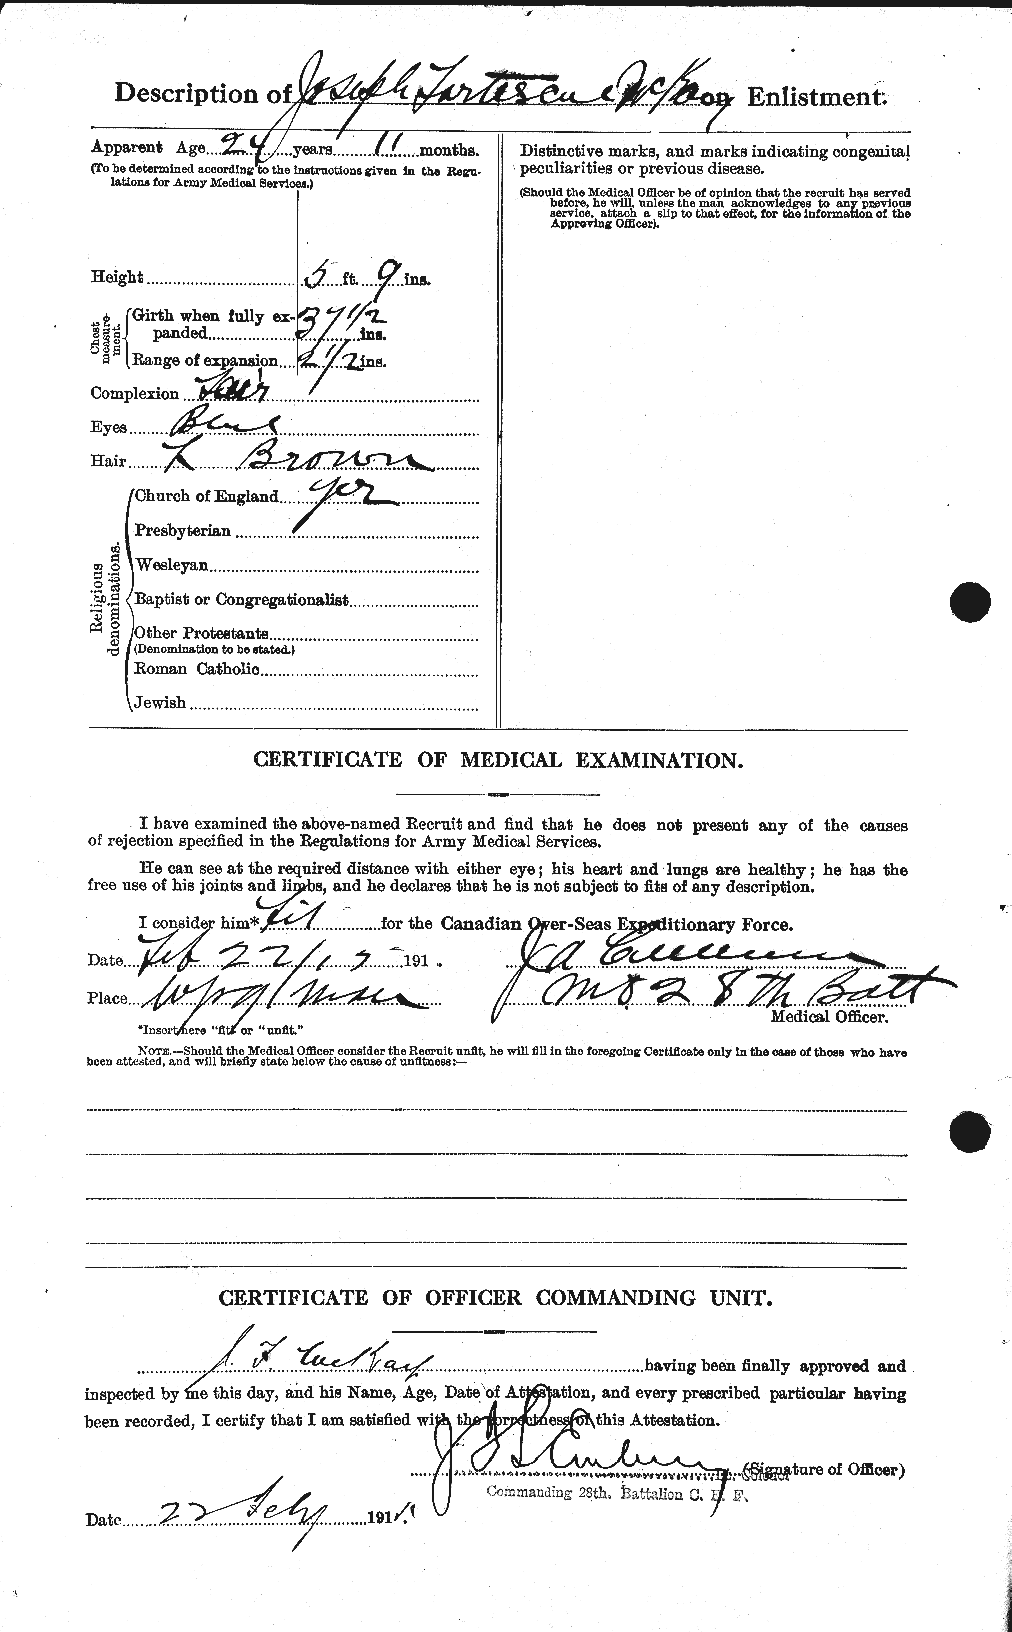 Personnel Records of the First World War - CEF 527114b